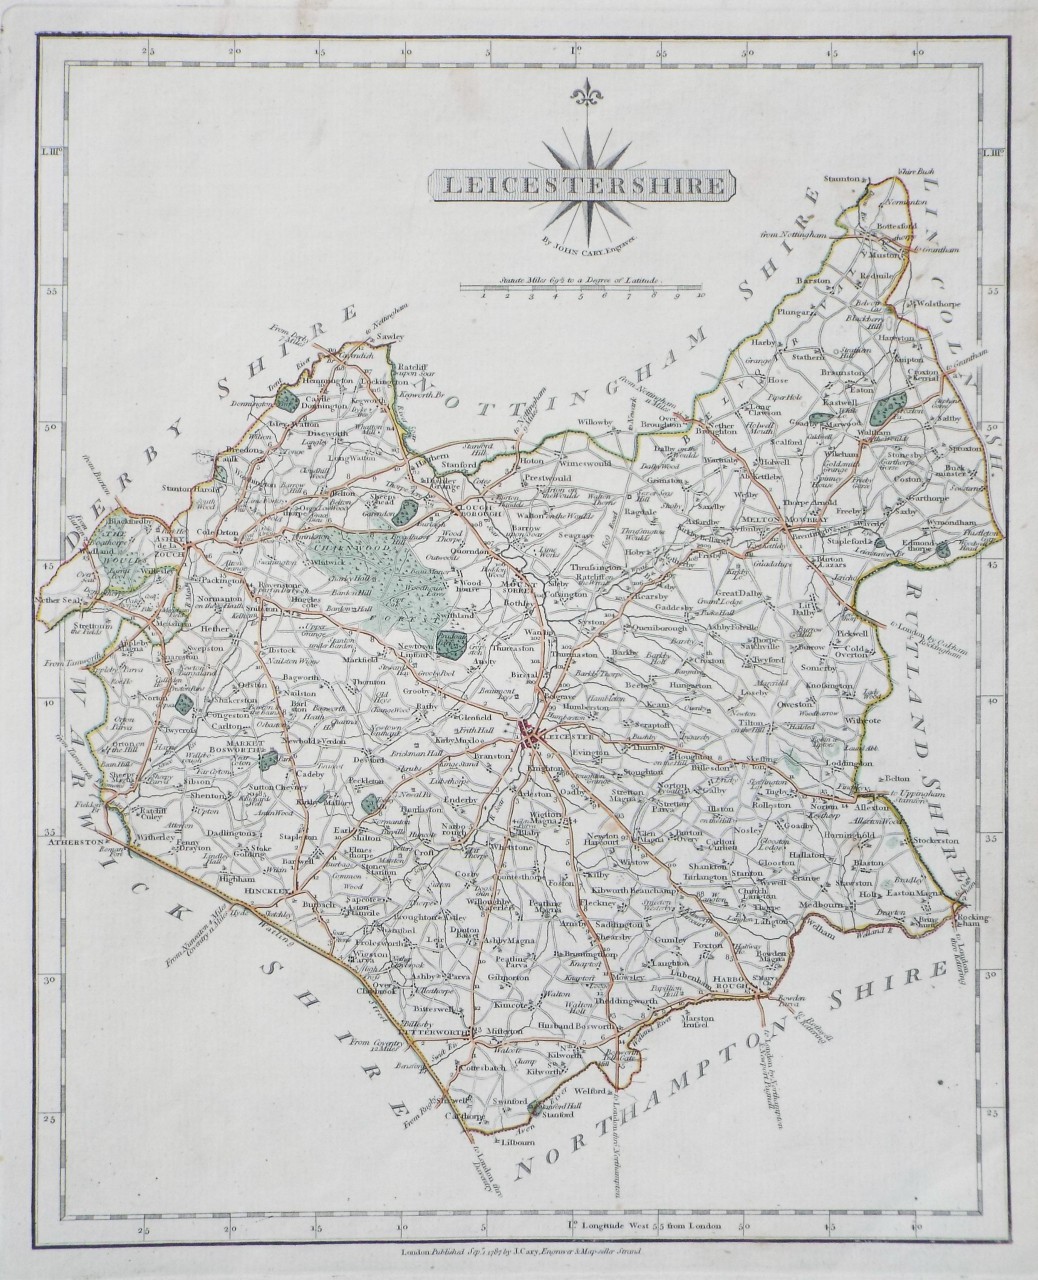 Map of Leicestershire